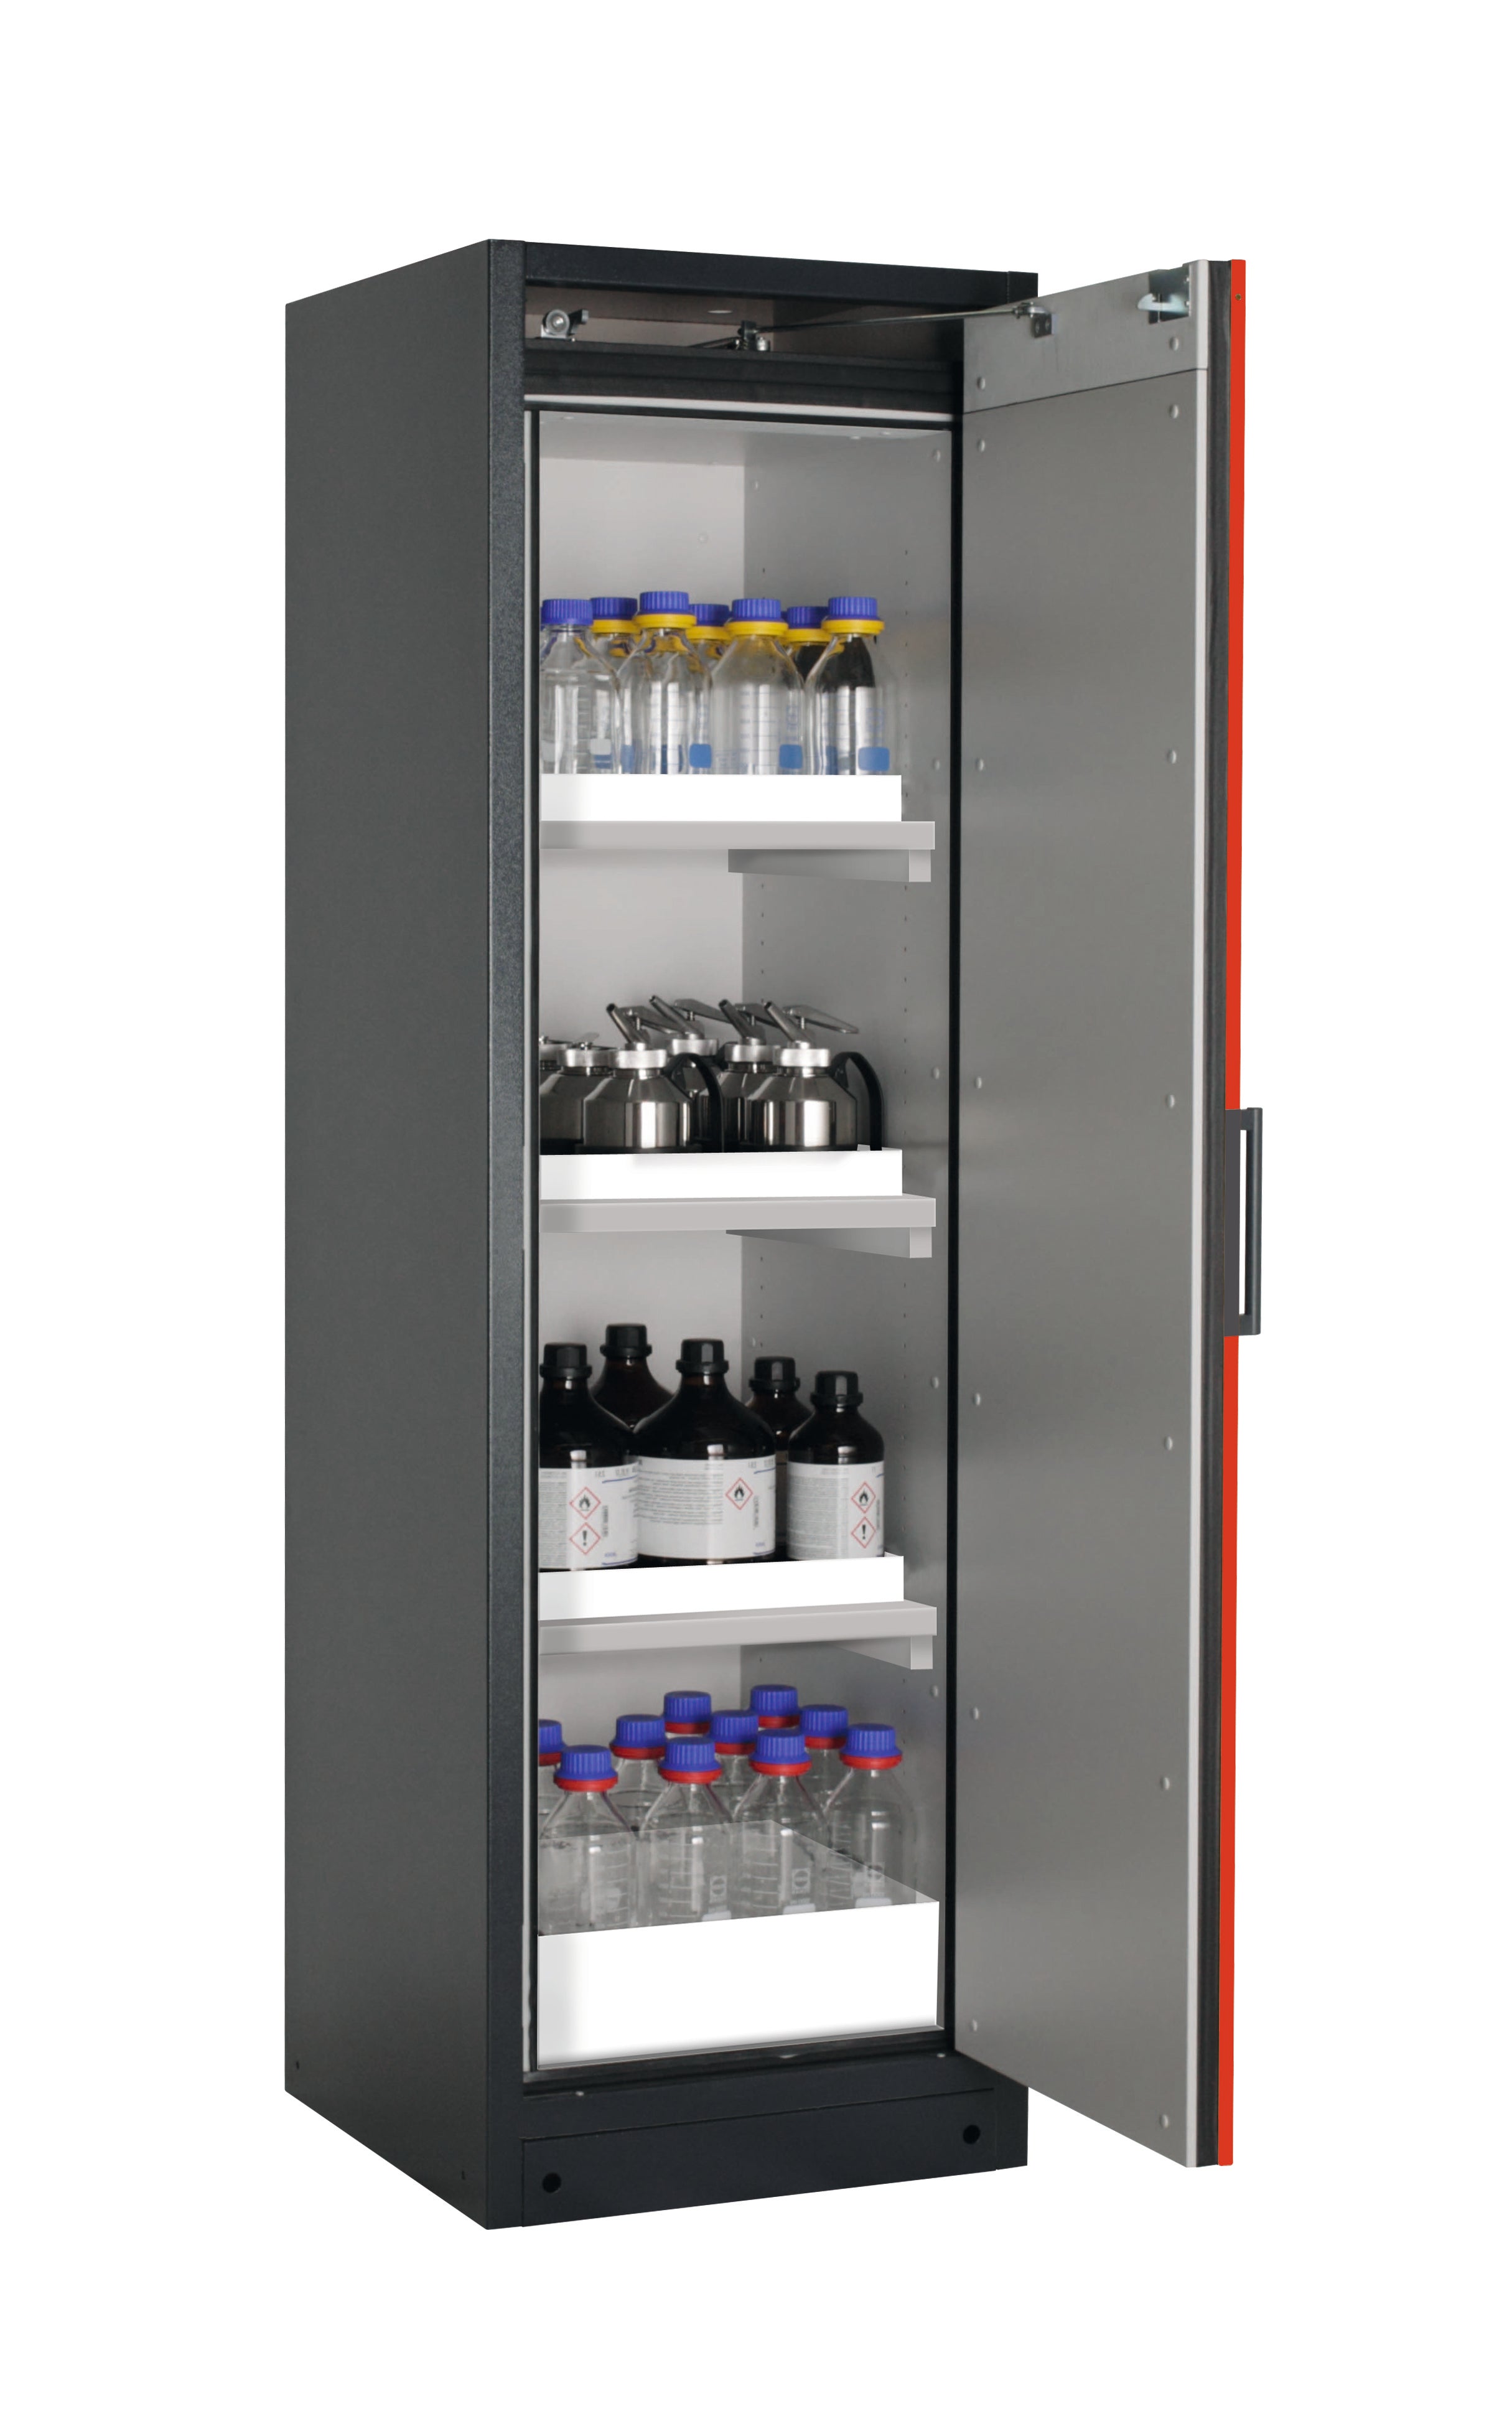 Type 90 safety storage cabinet Q-PEGASUS-90 model Q90.195.060.WDACR in traffic red RAL 3020 with 3x tray shelf (standard) (polypropylene),